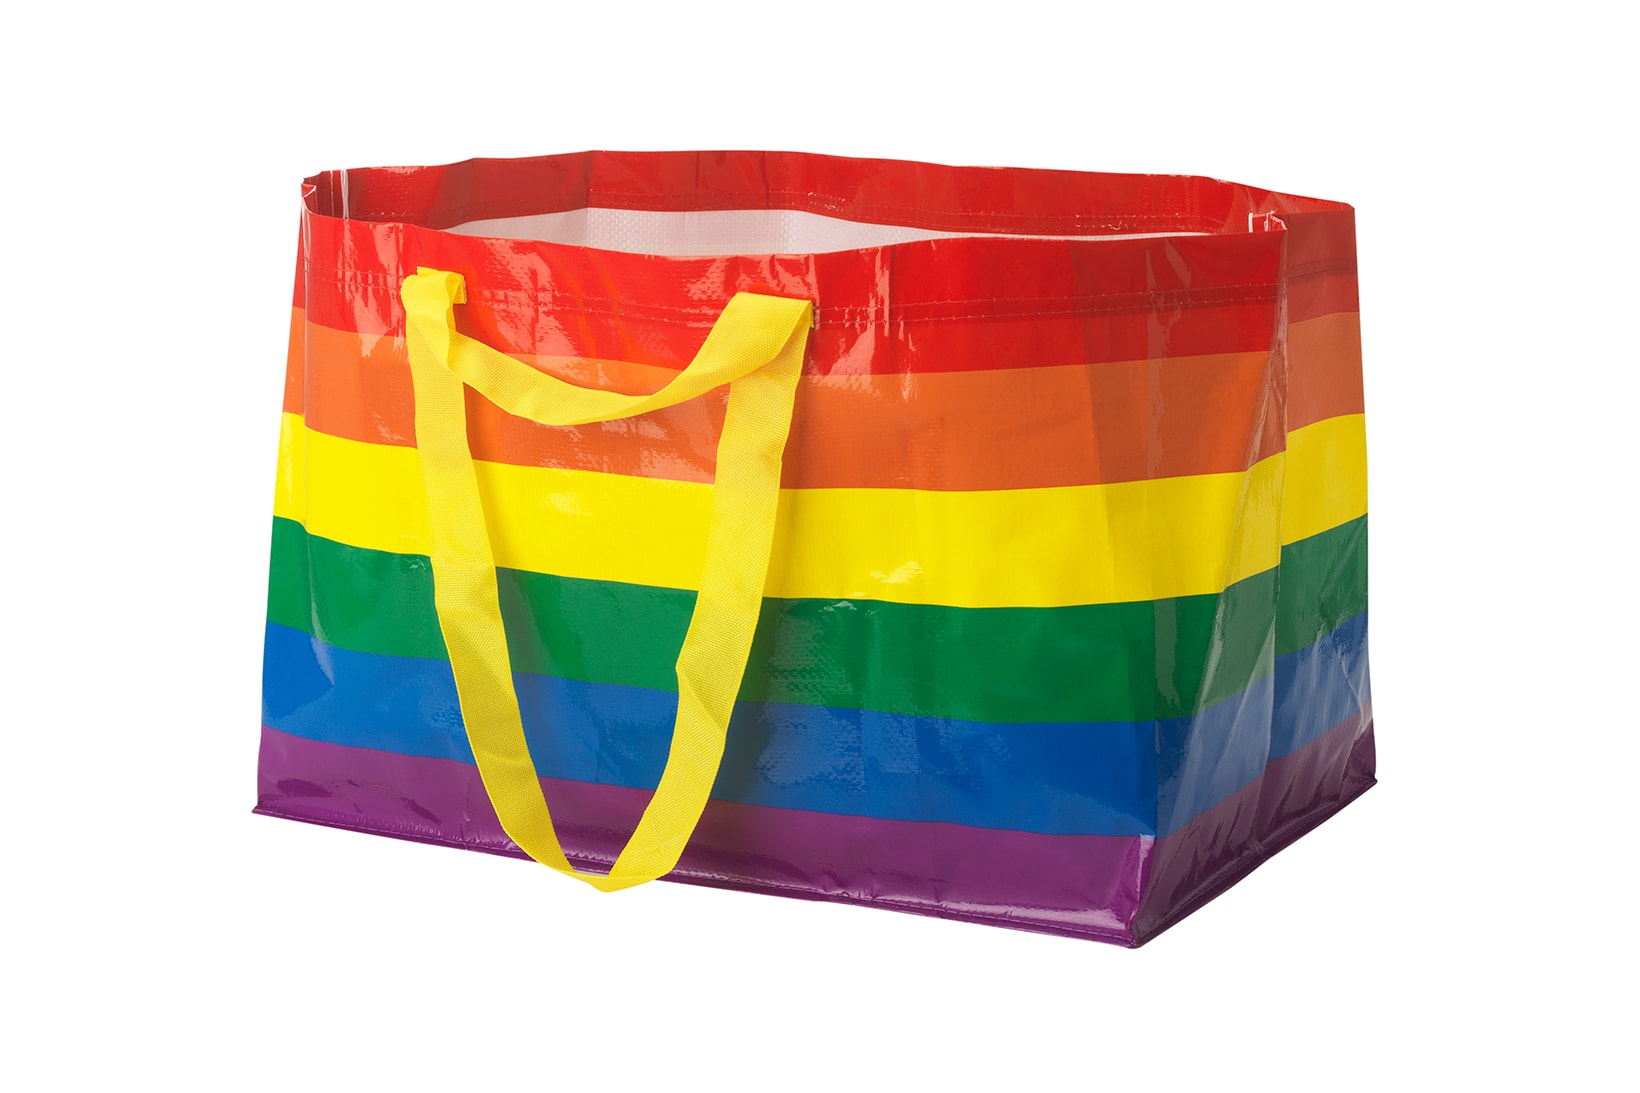 ikea united states pride month collection storstomma rainbow lunch large bag lgbtq donation charity homeless